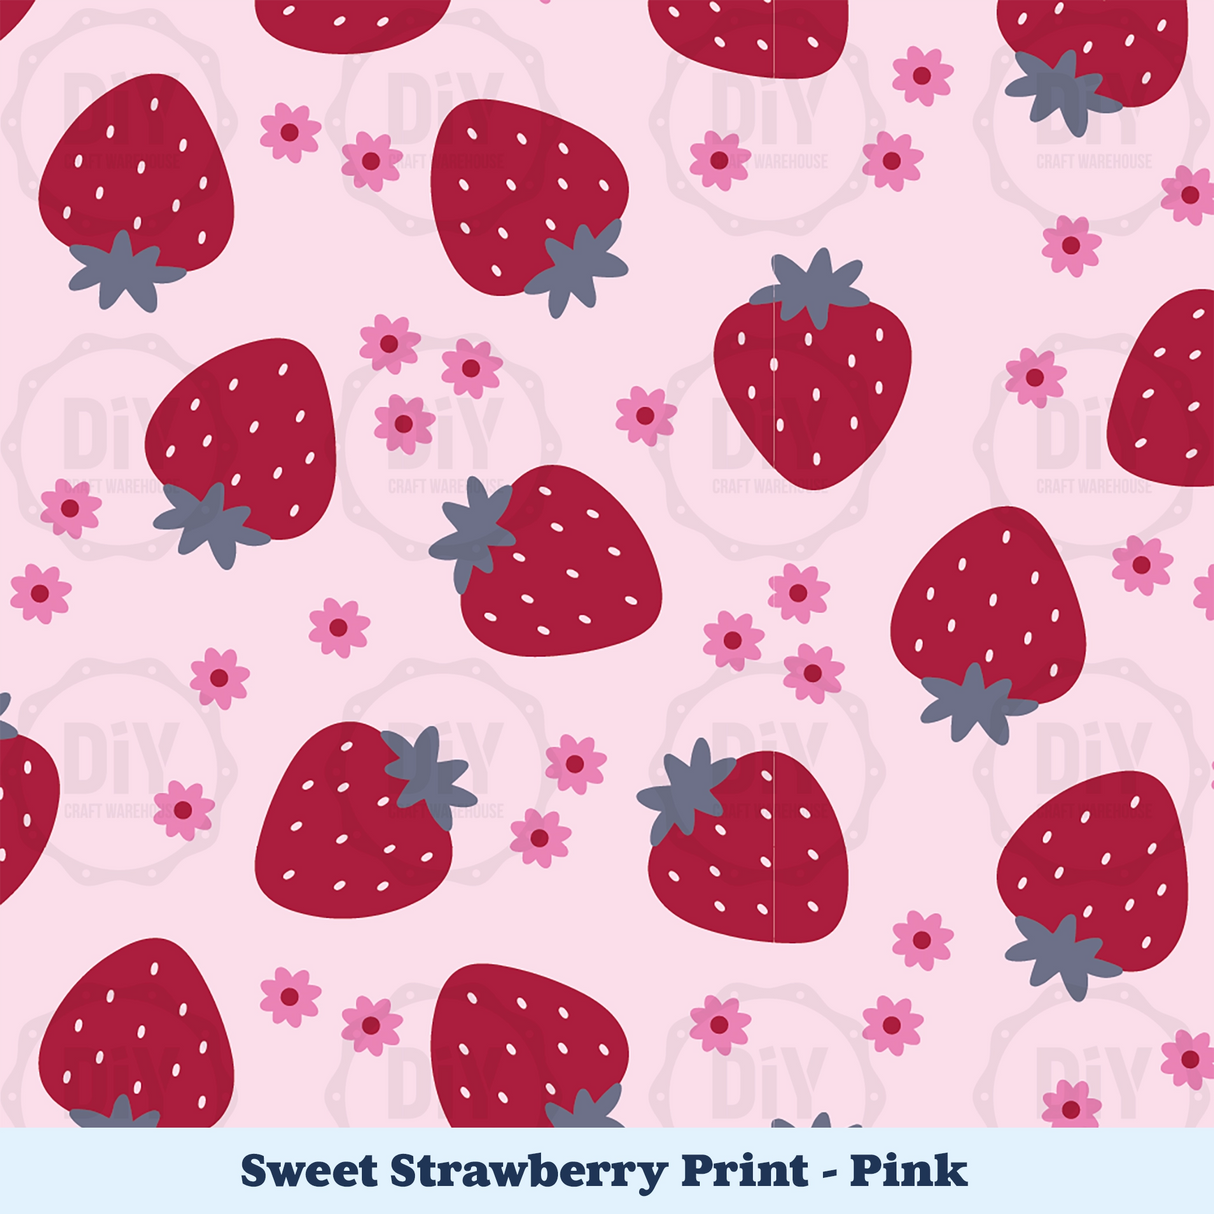 Sweet Strawberry Sublimation Transfer - Pink